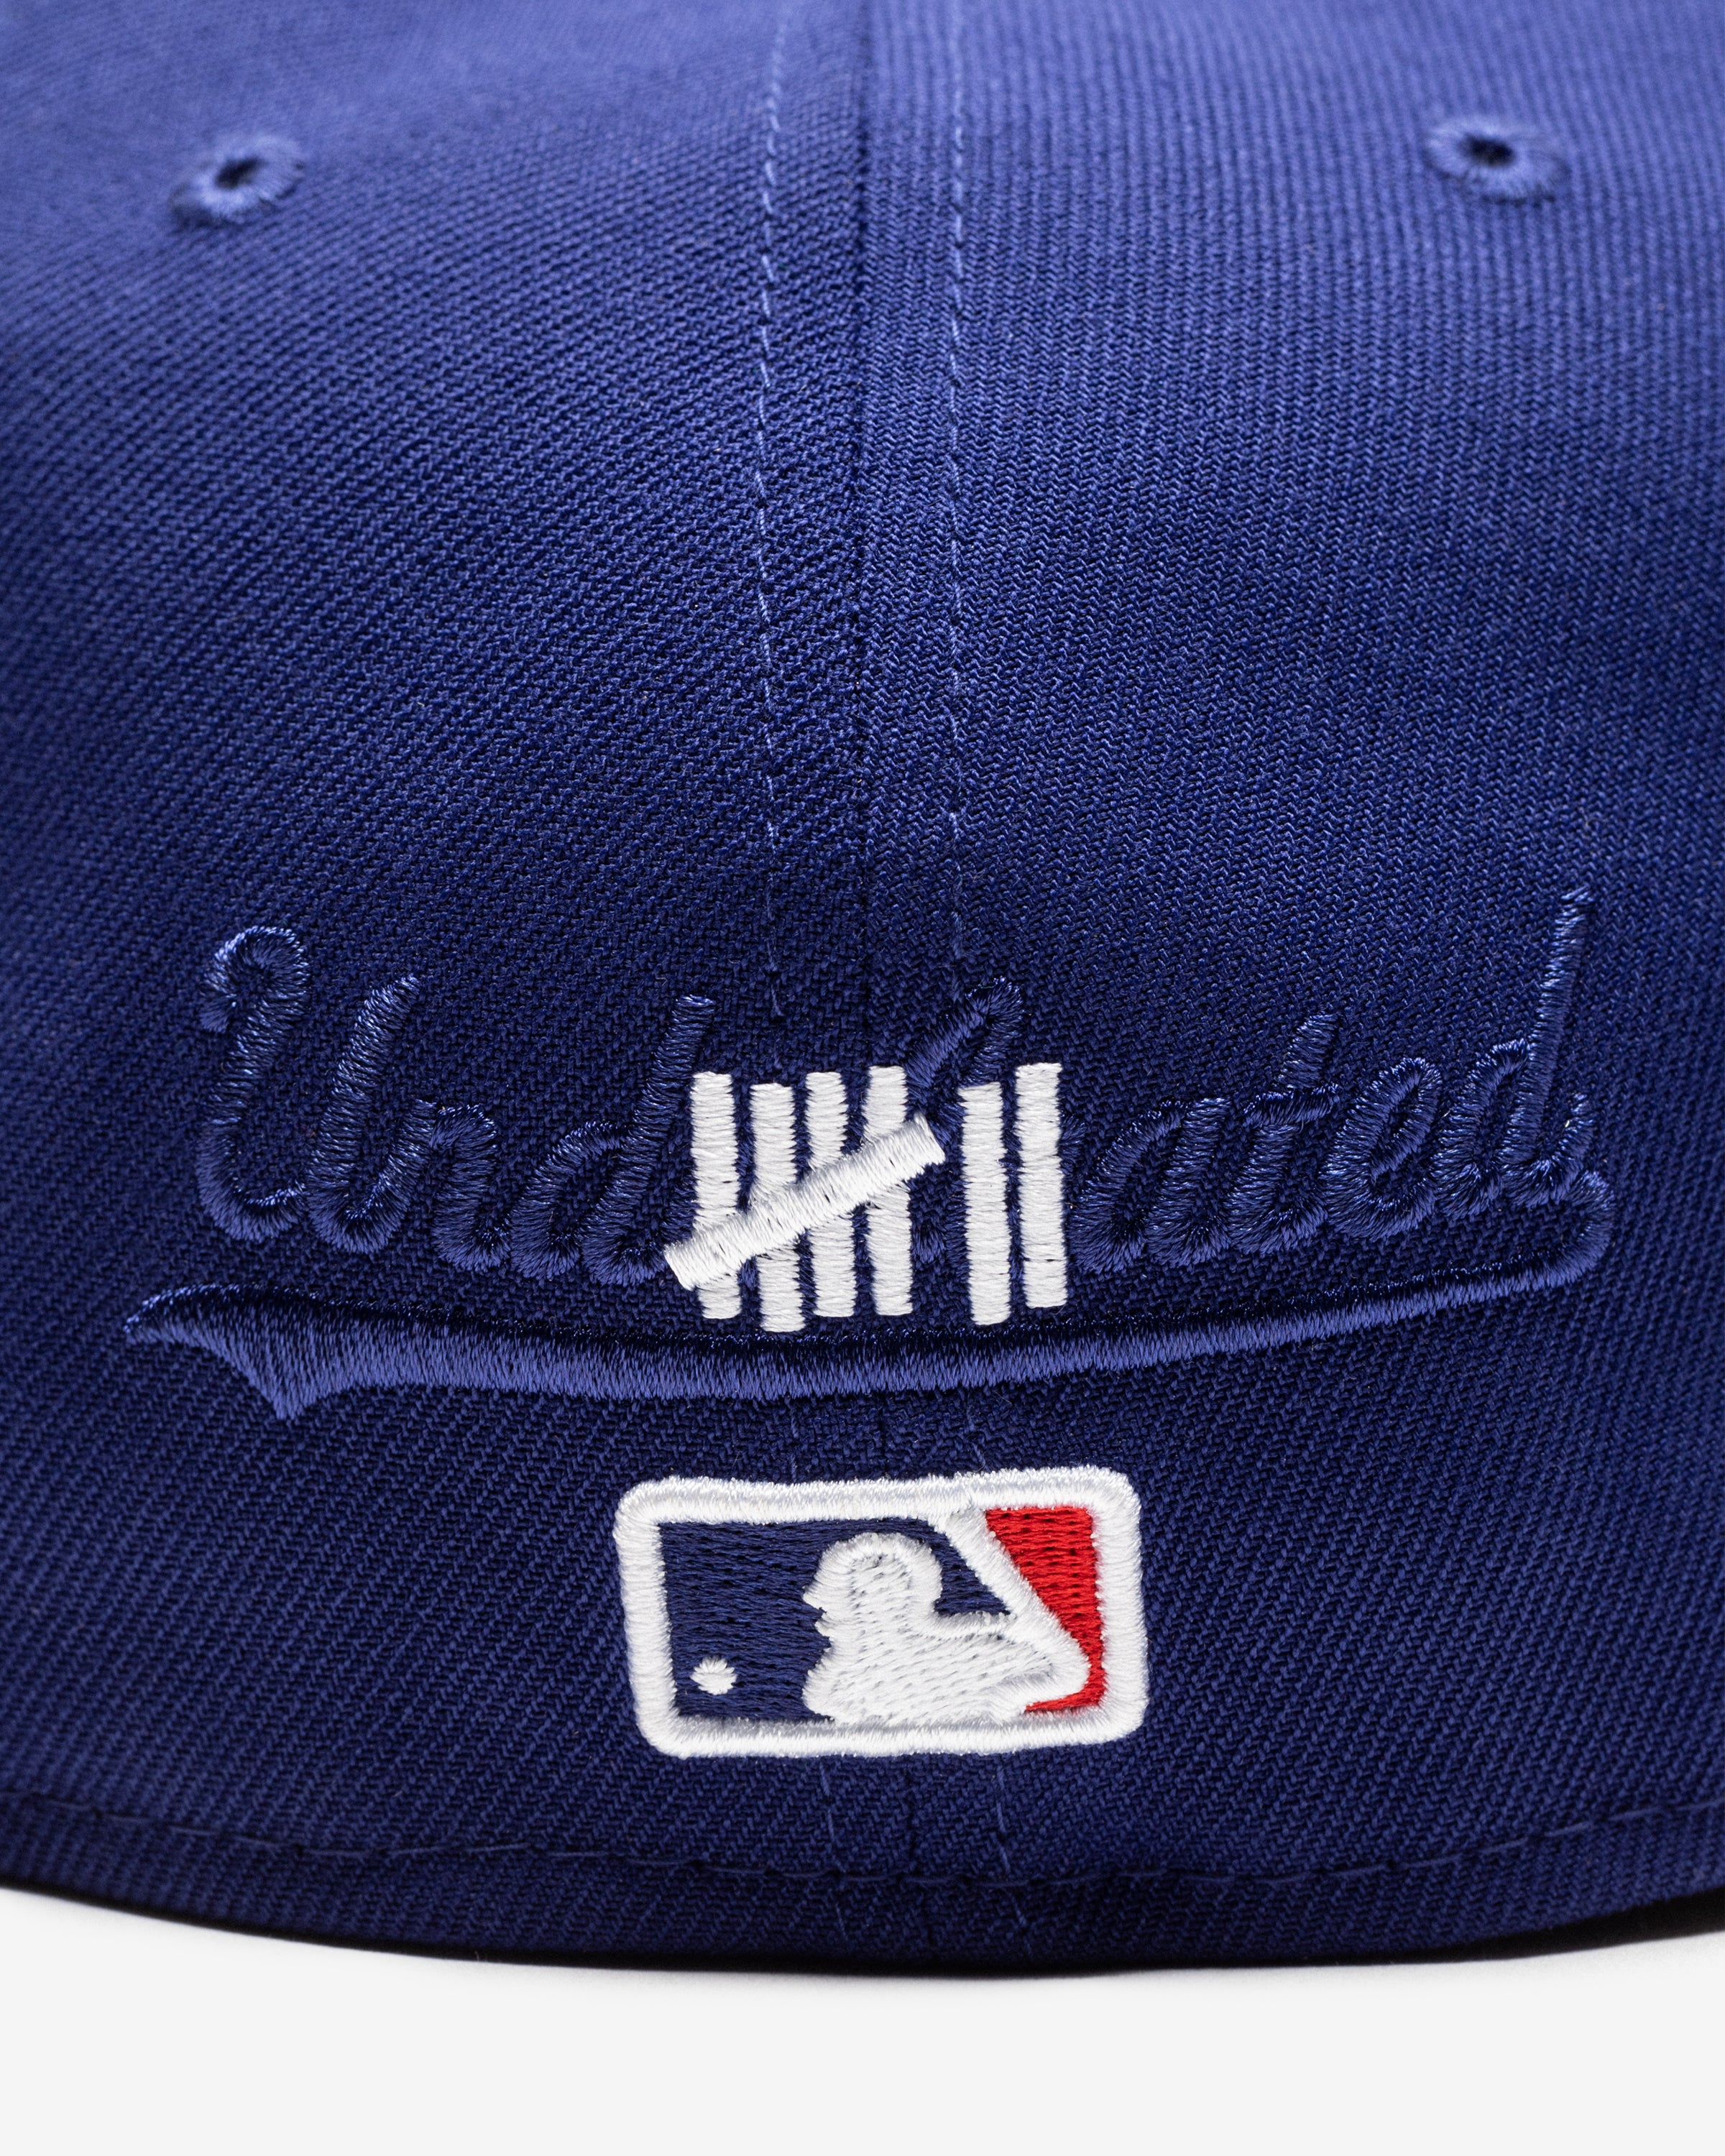 UNDEFEATED on X: UNDEFEATED x New Era LA Dodgers Collection Available at  8am PST on Wednesday, 10/12 at UNDEFEATED La Brea, Silverlake, Santa  Monica, Glendale, Las Vegas, Phoenix,  and at the